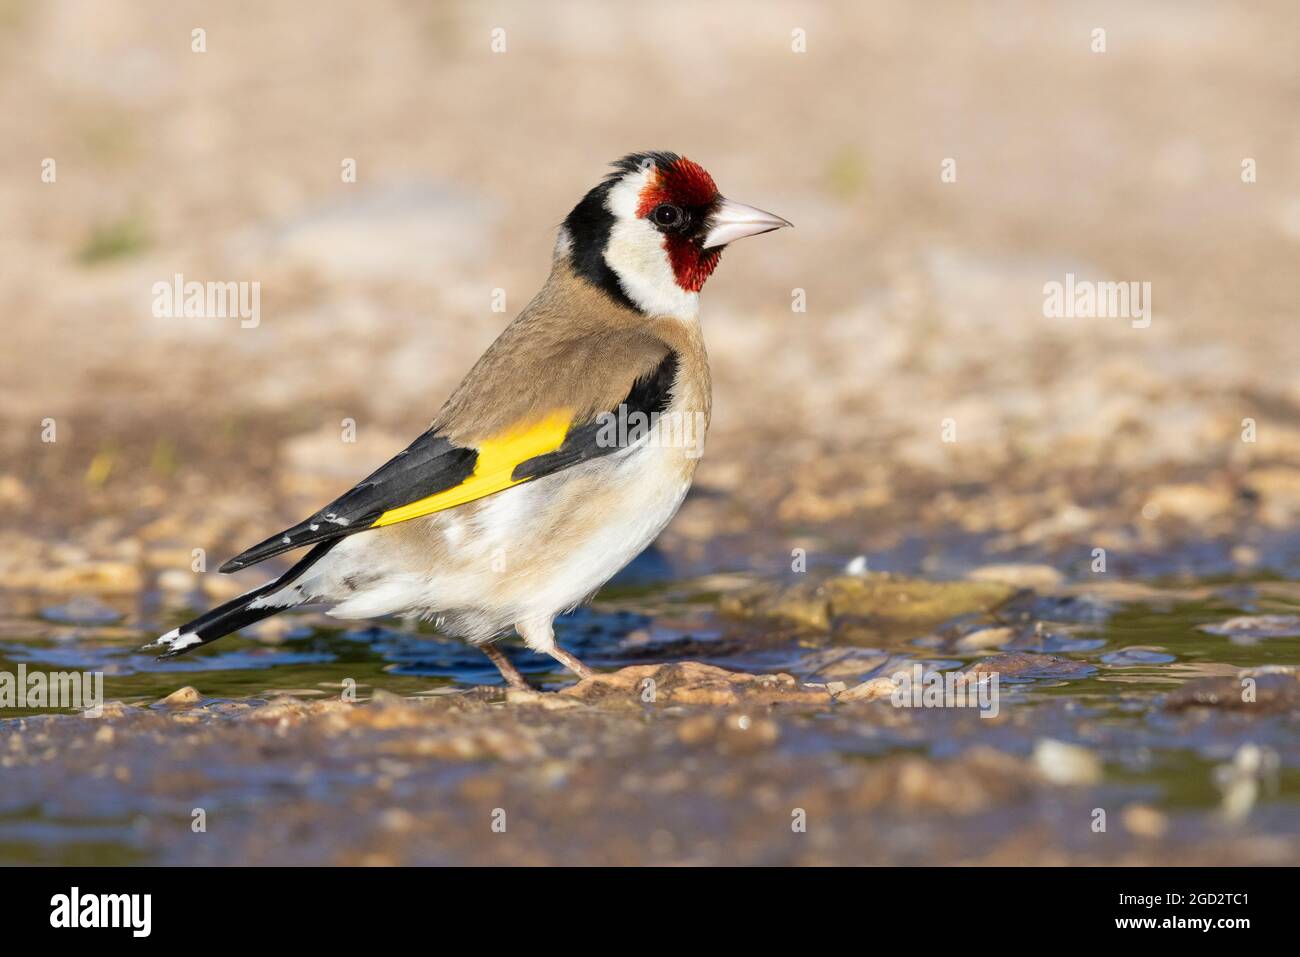 European Goldfinch (Carduelis carduelis), side view of an adult standing in a puddle, Abruzzo, Italy Stock Photo